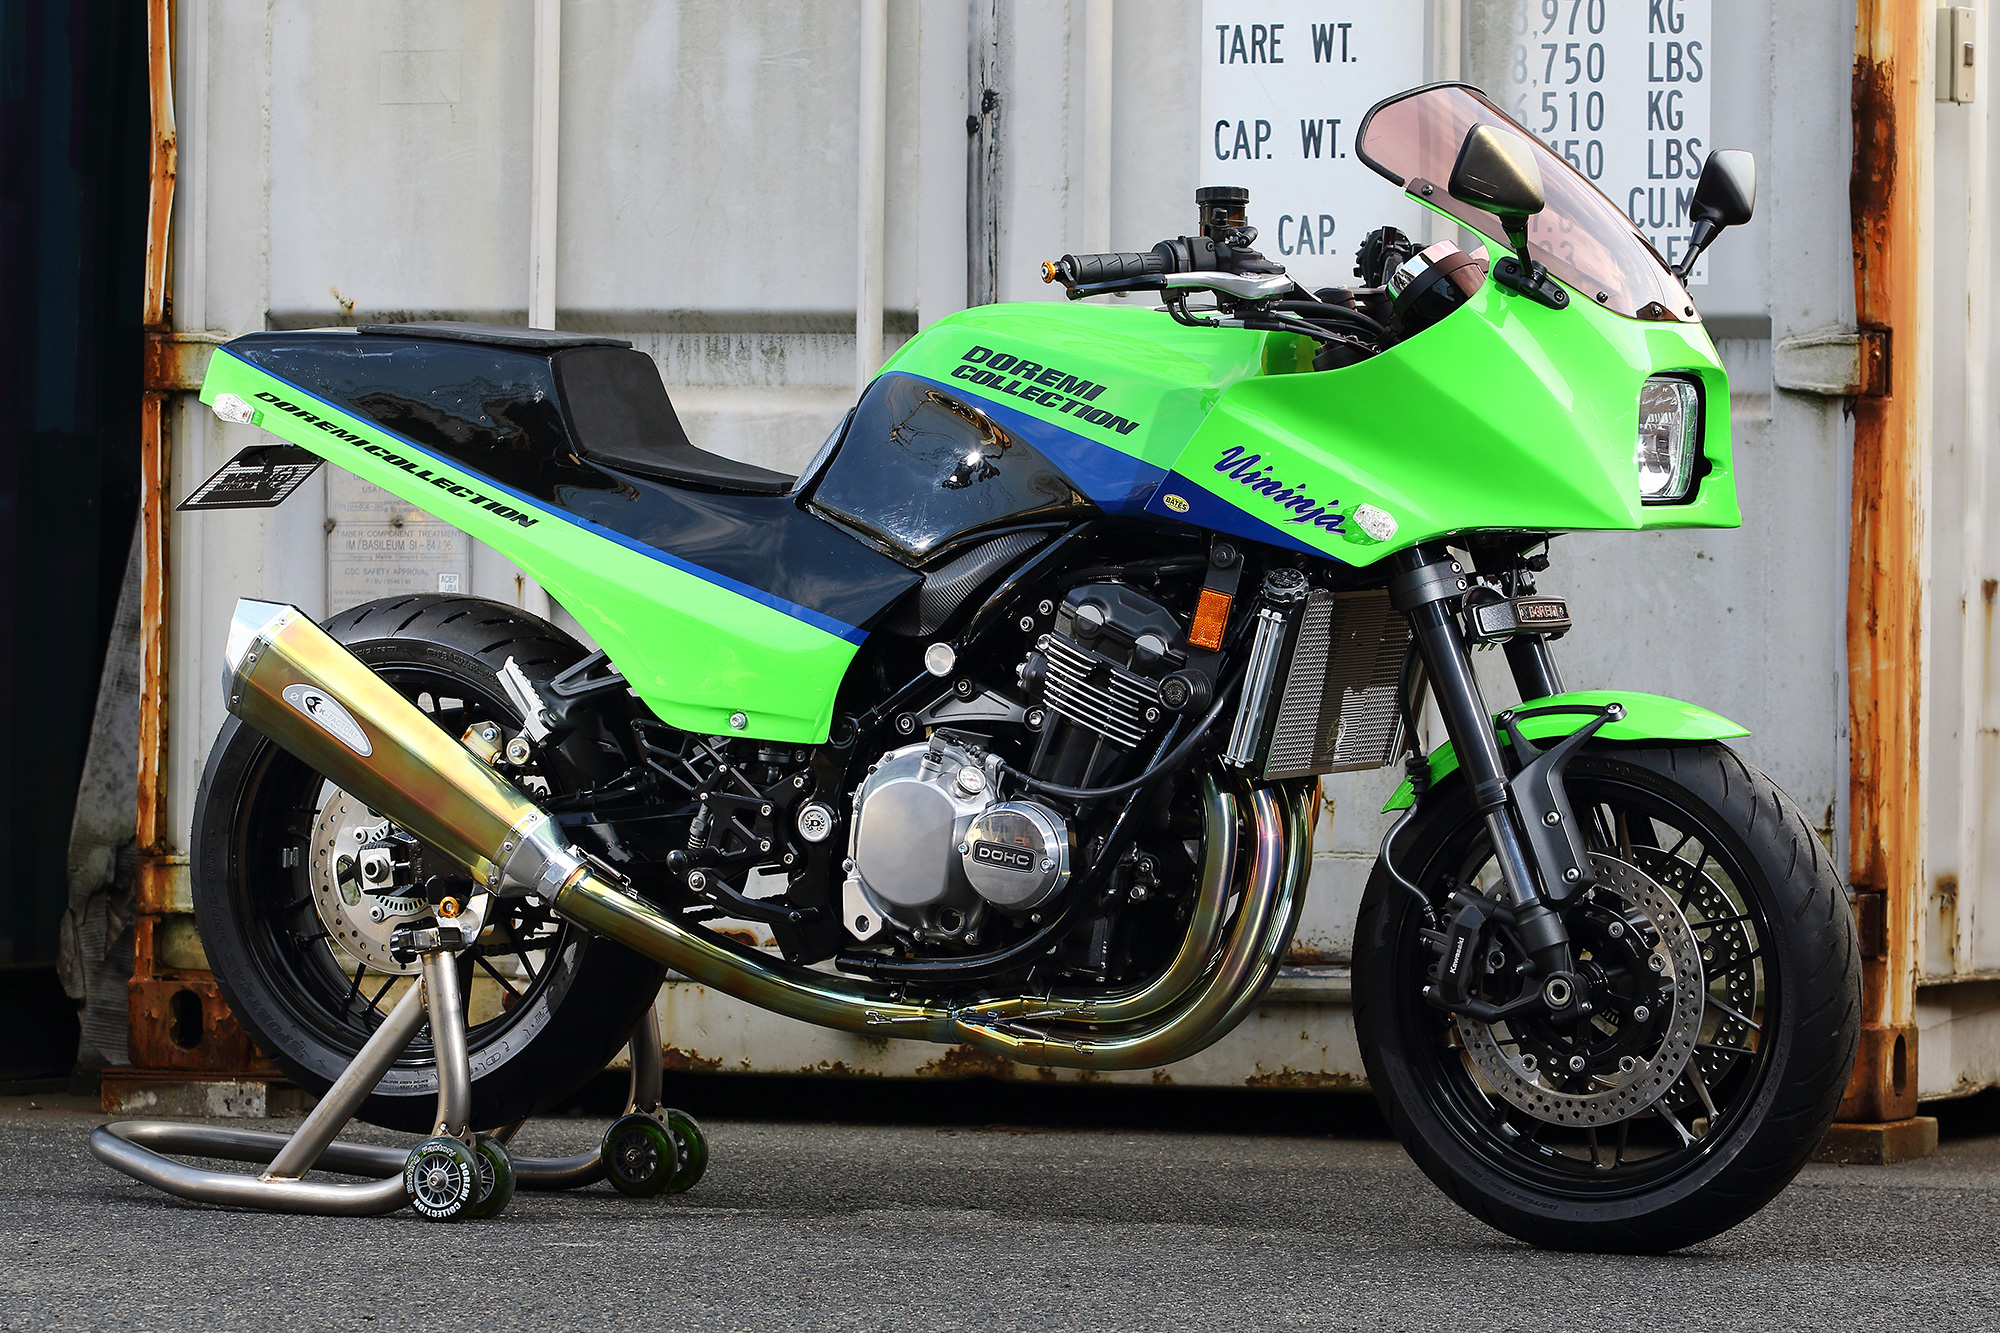 Z900RS用外装キット『GPZ900Rスタイル』『Z1Rスタイル』 by ドレミ 